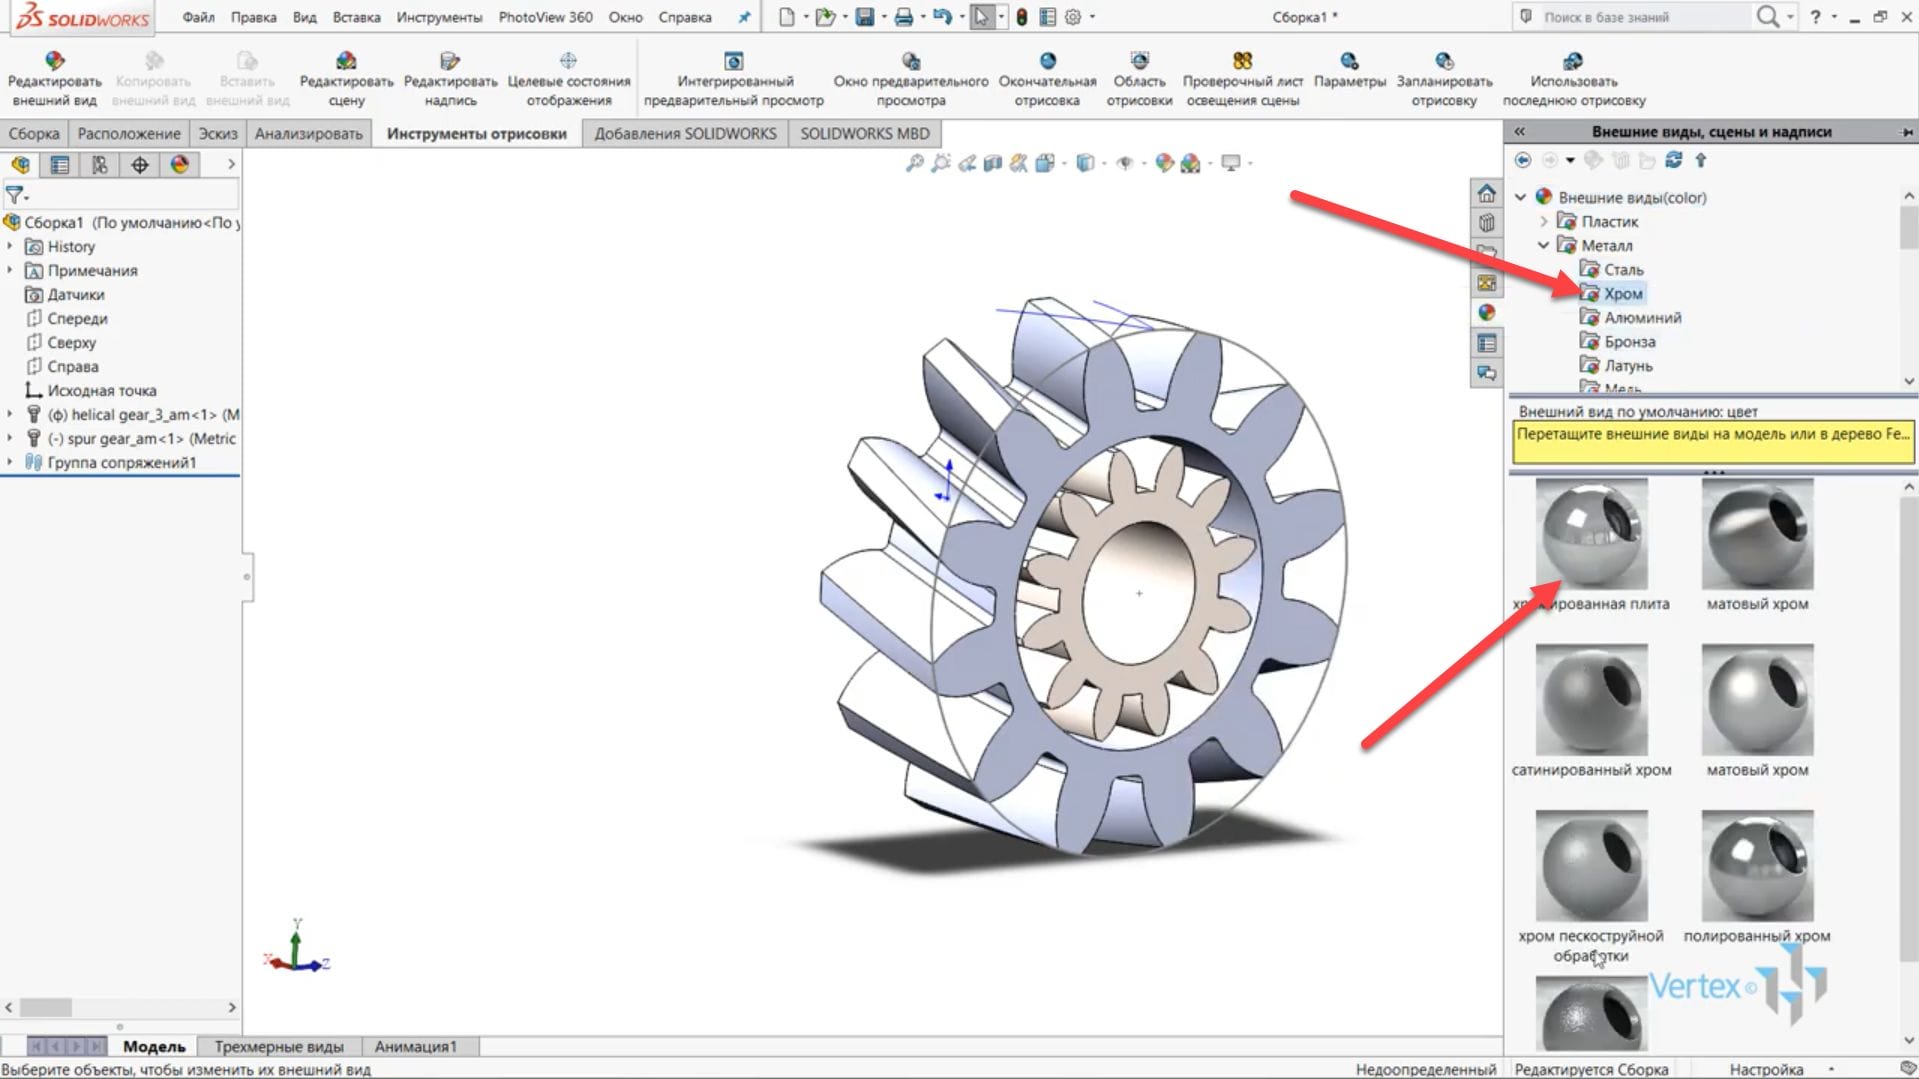 Solidworks PHOTOVIEW 360